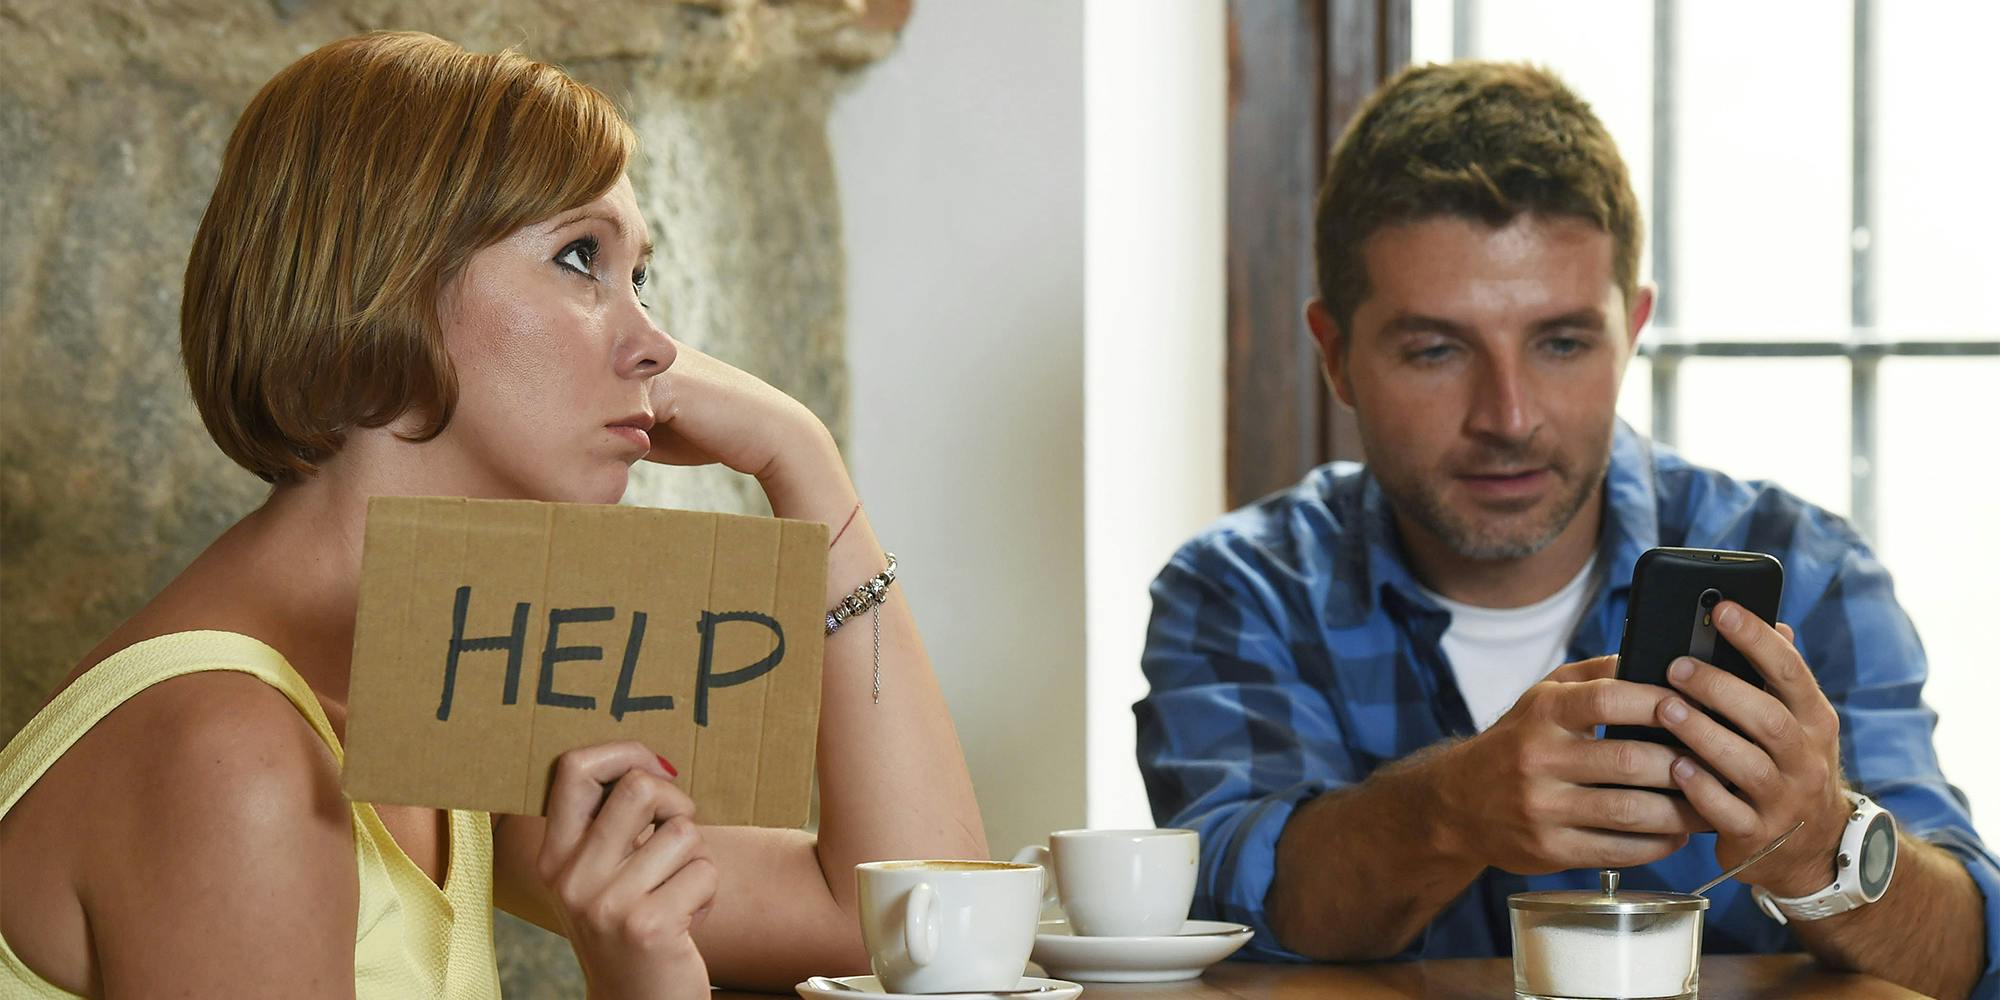 woman holding "help" sign while man looks at phone